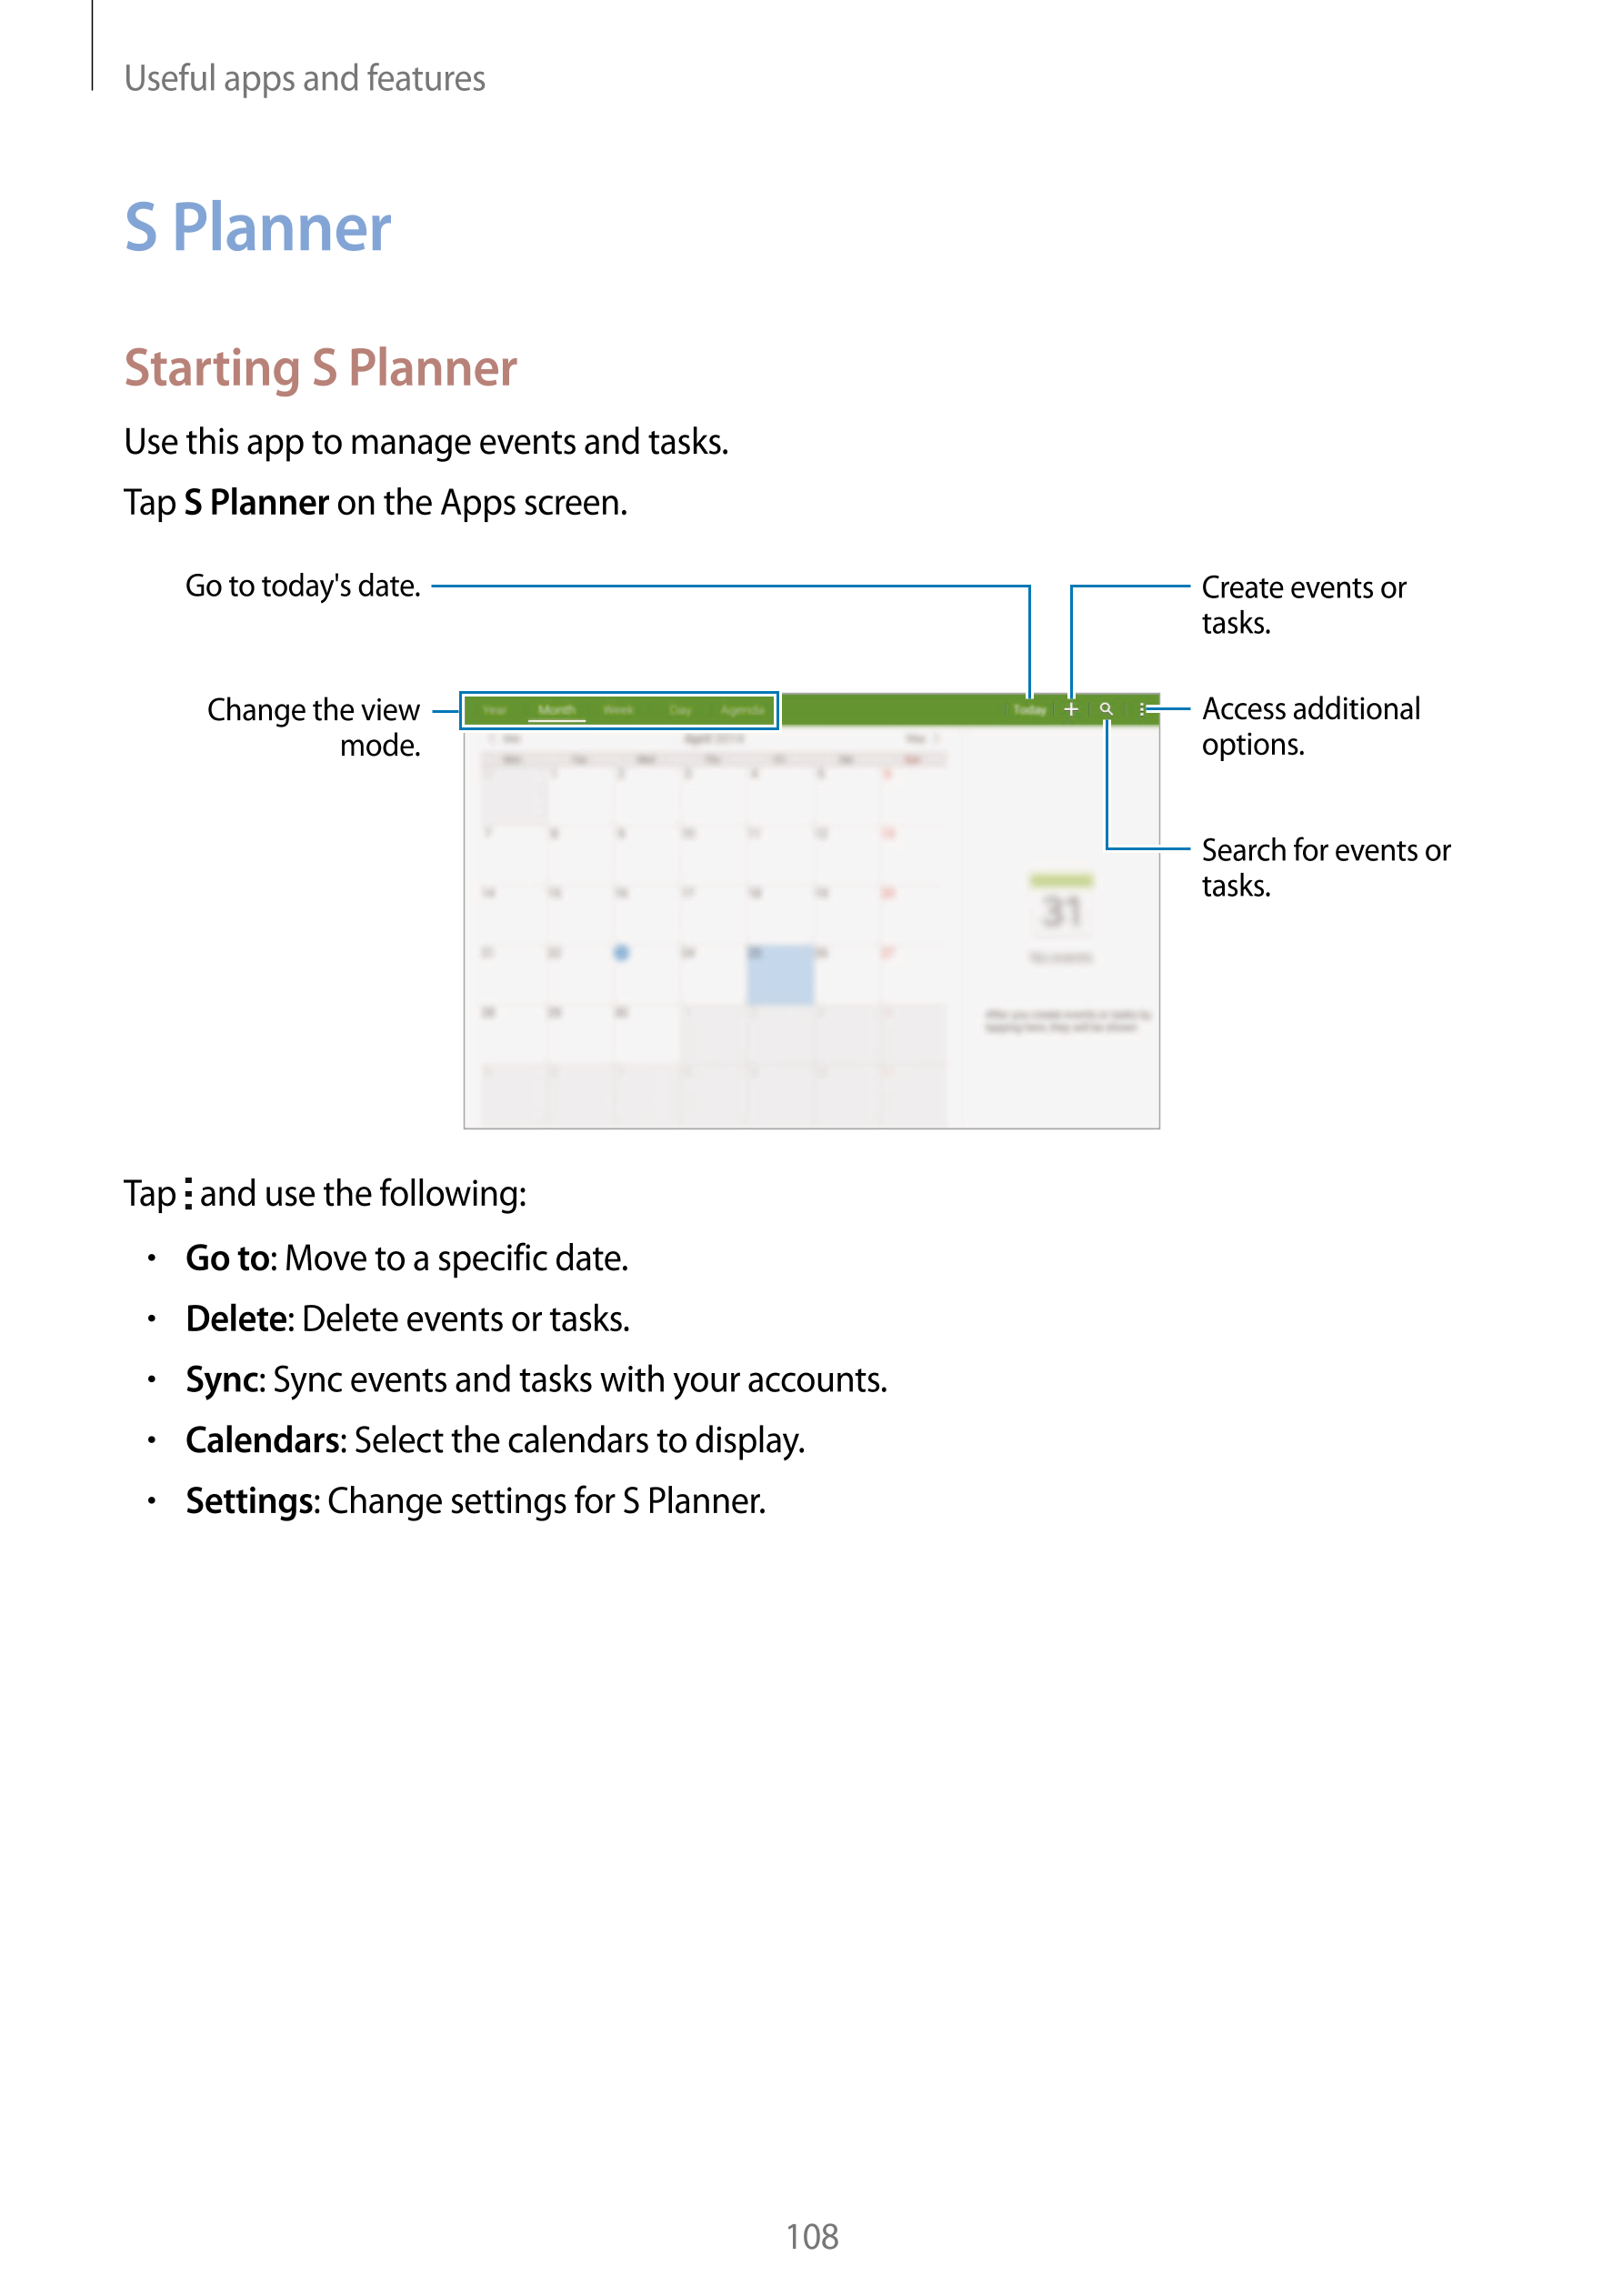 Useful apps and features
S Planner
Starting S Planner
Use this app to manage events and tasks.
Tap  S Planner on the Apps screen